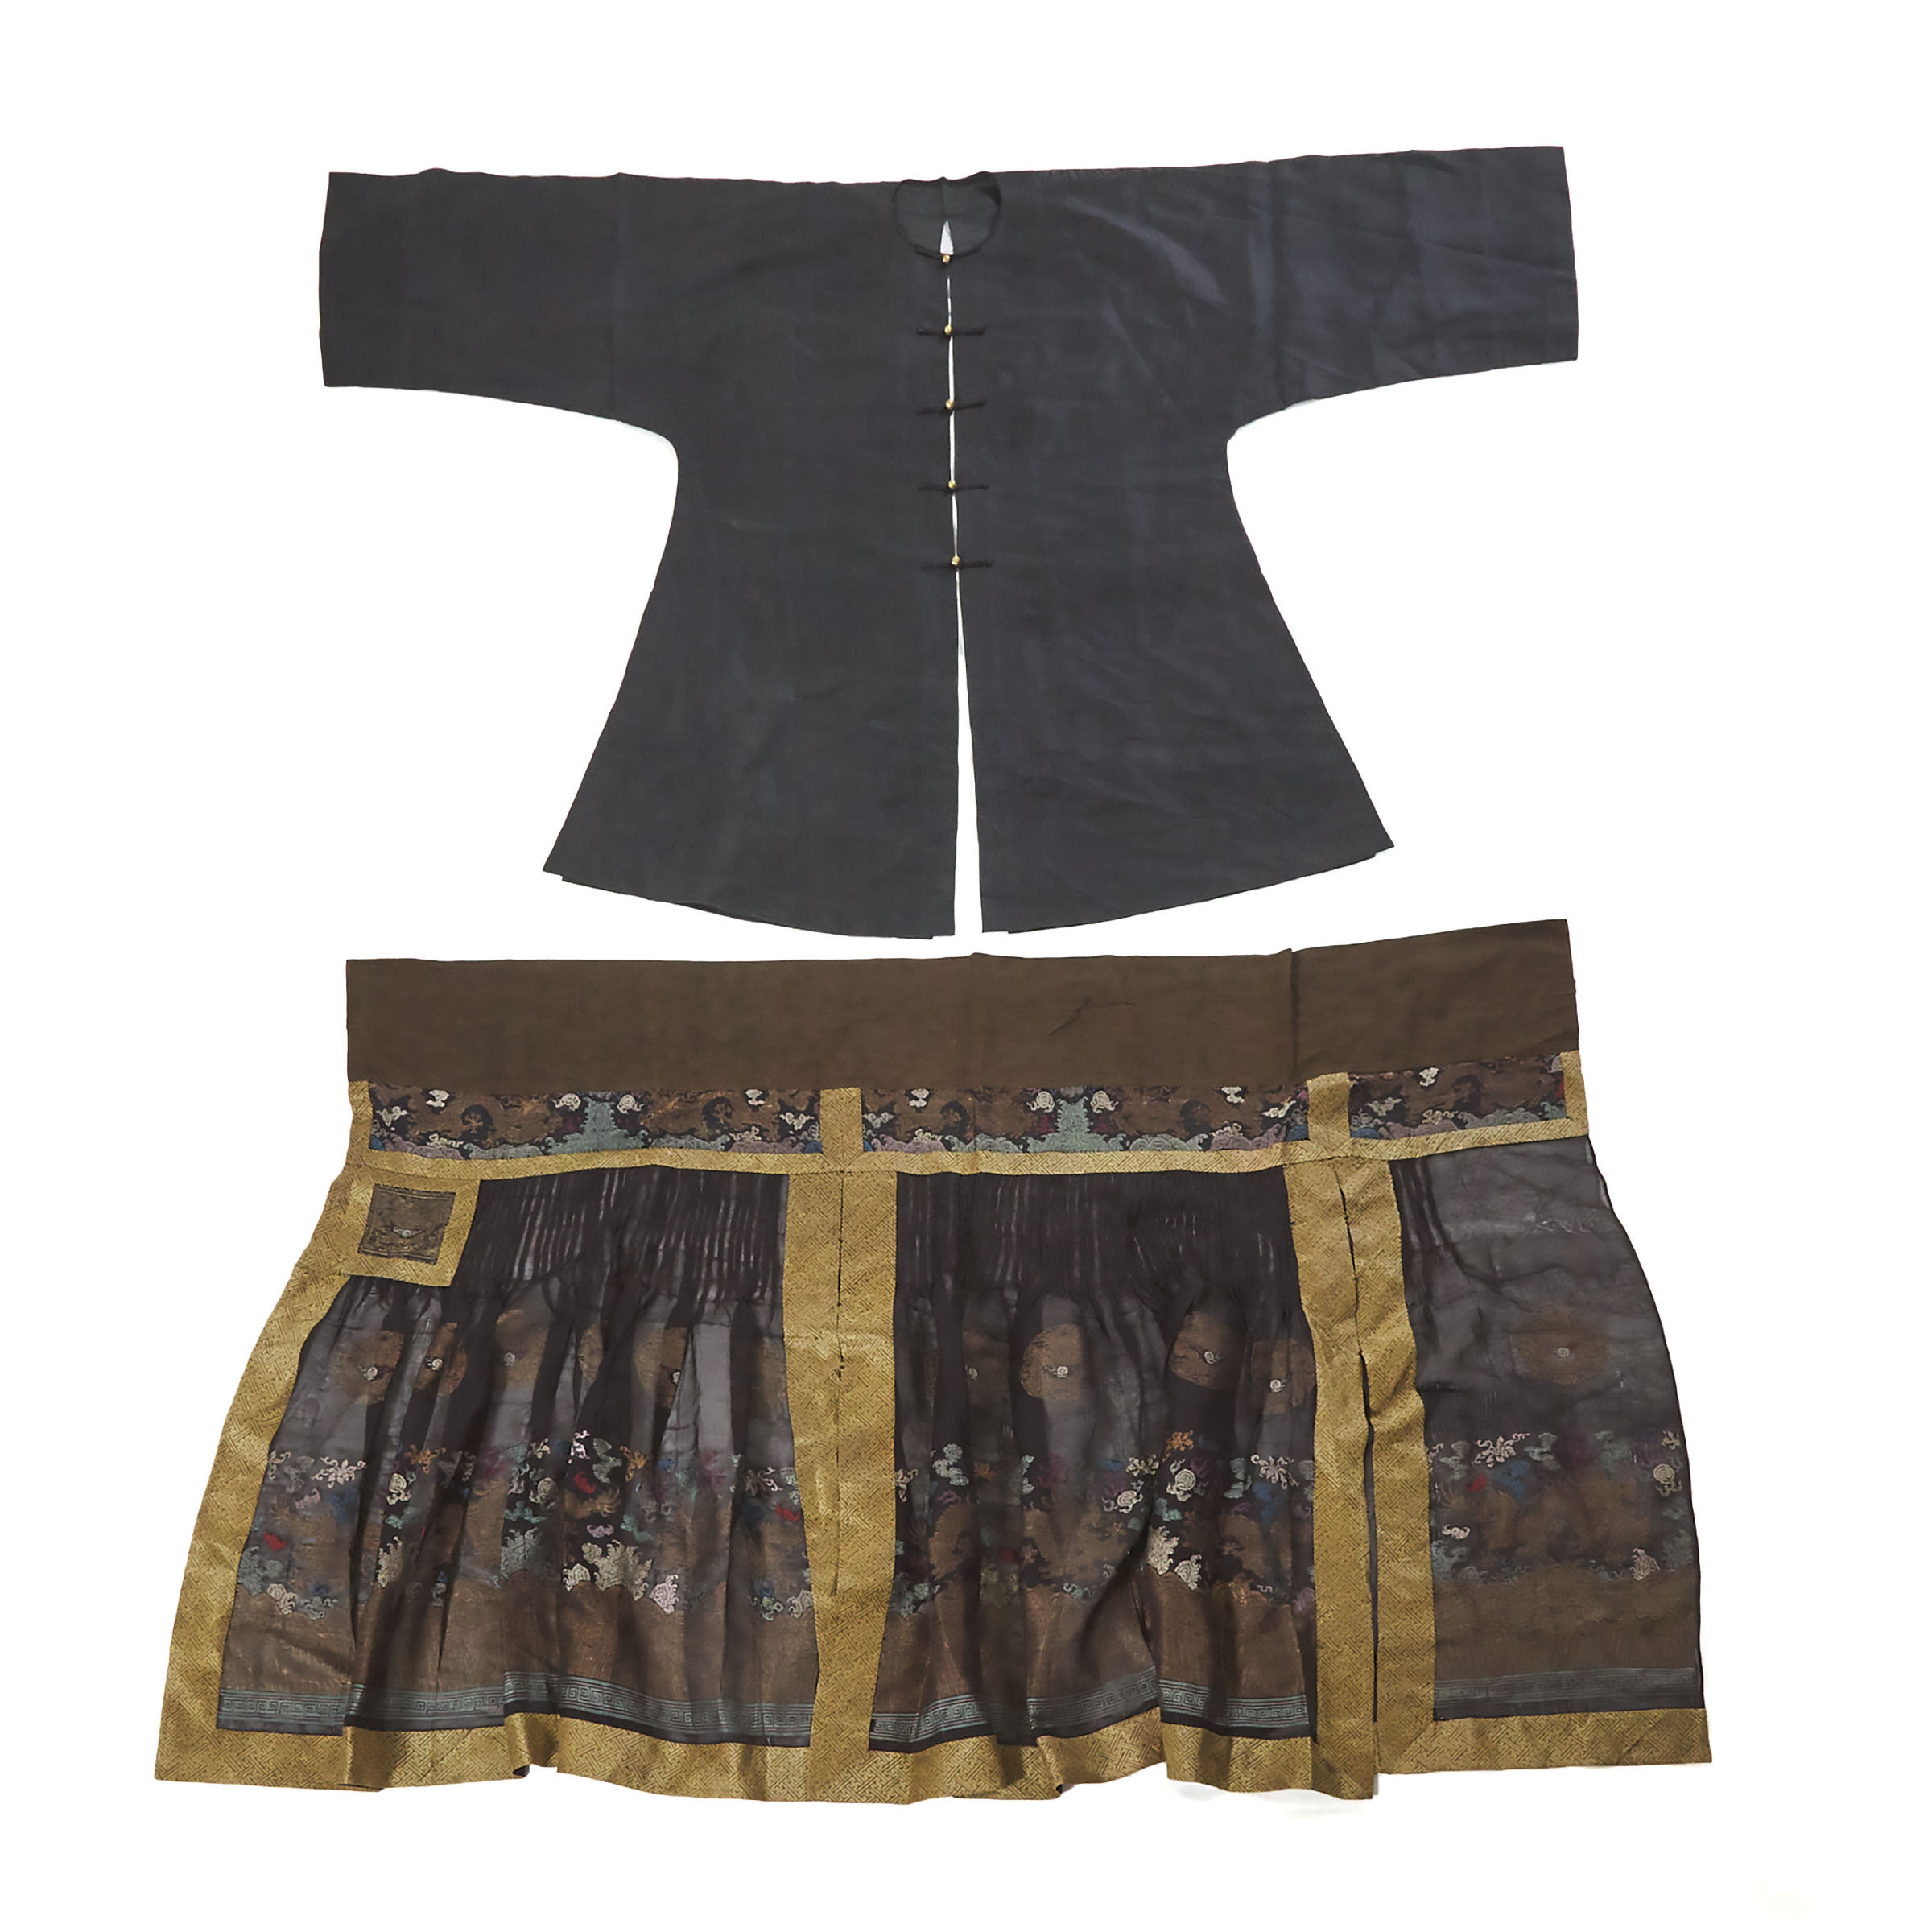 A Black-Ground Summer Gauze Jacket, Together With an Embroidered Gauze Skirt